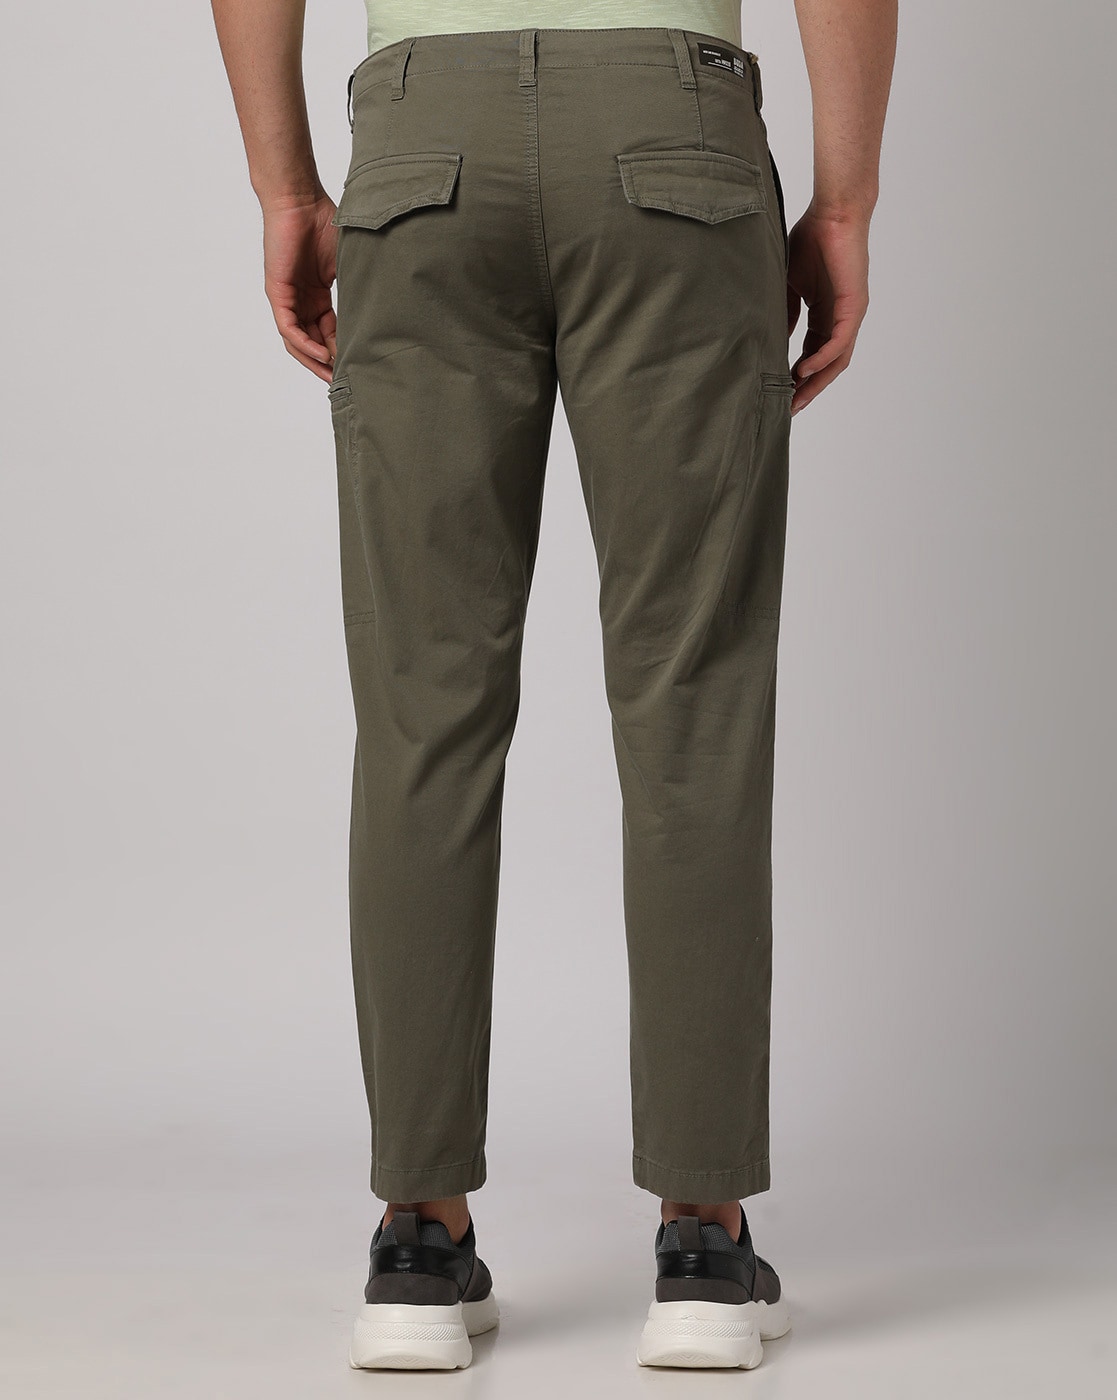 Buy tbase mens Clay Cotton Solid Cargo Pant for Men online India